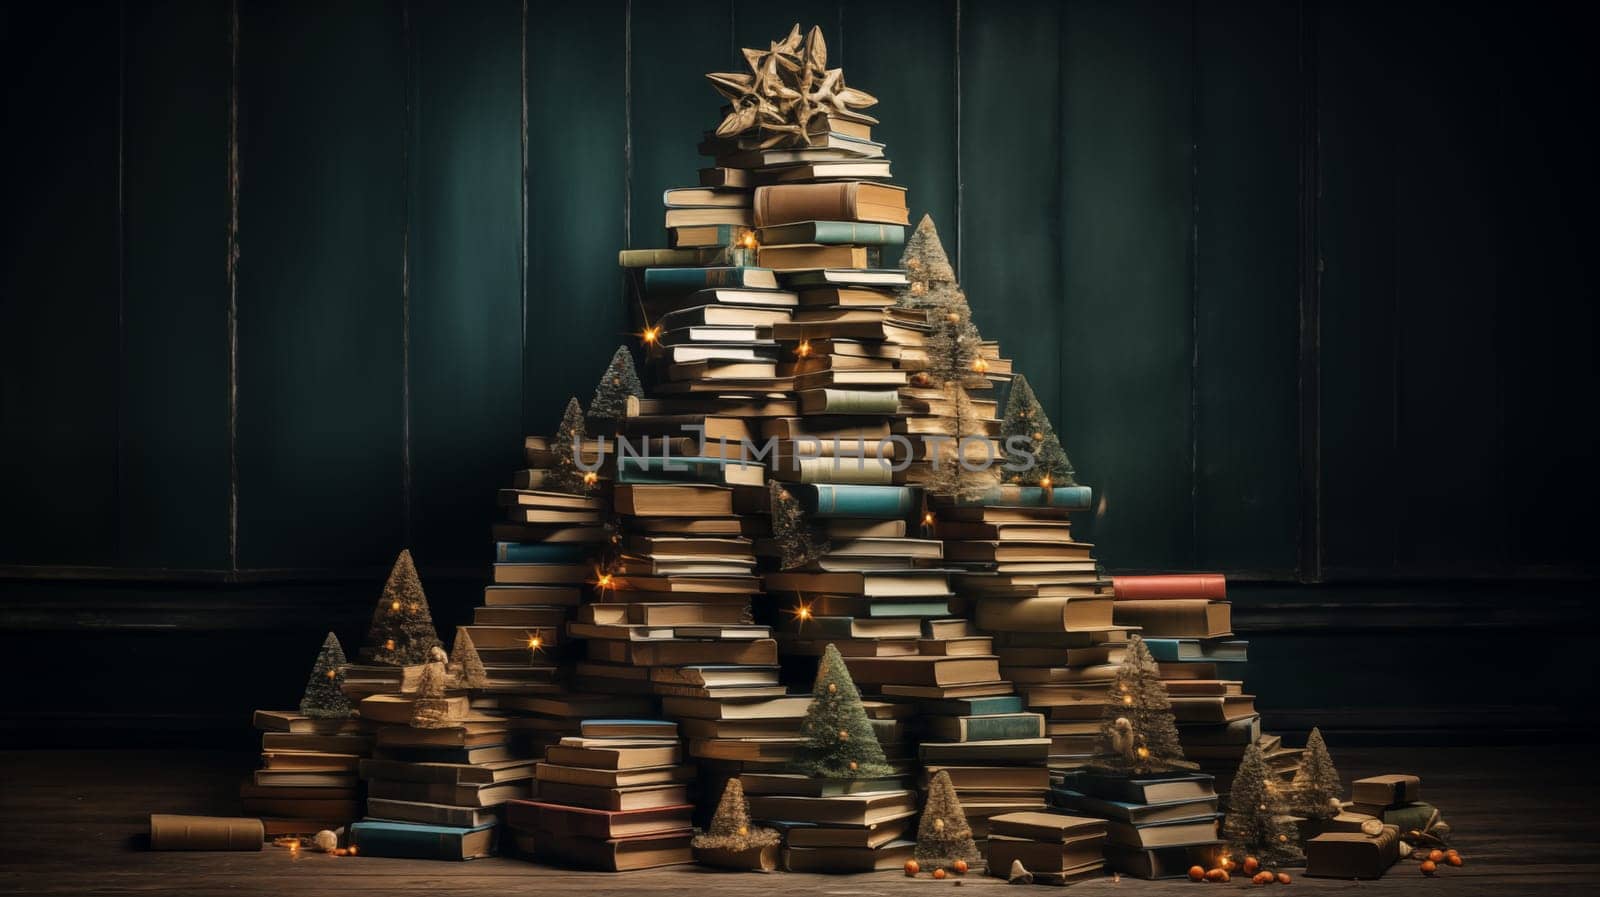 An creative Christmas tree made of books stands on dark background.